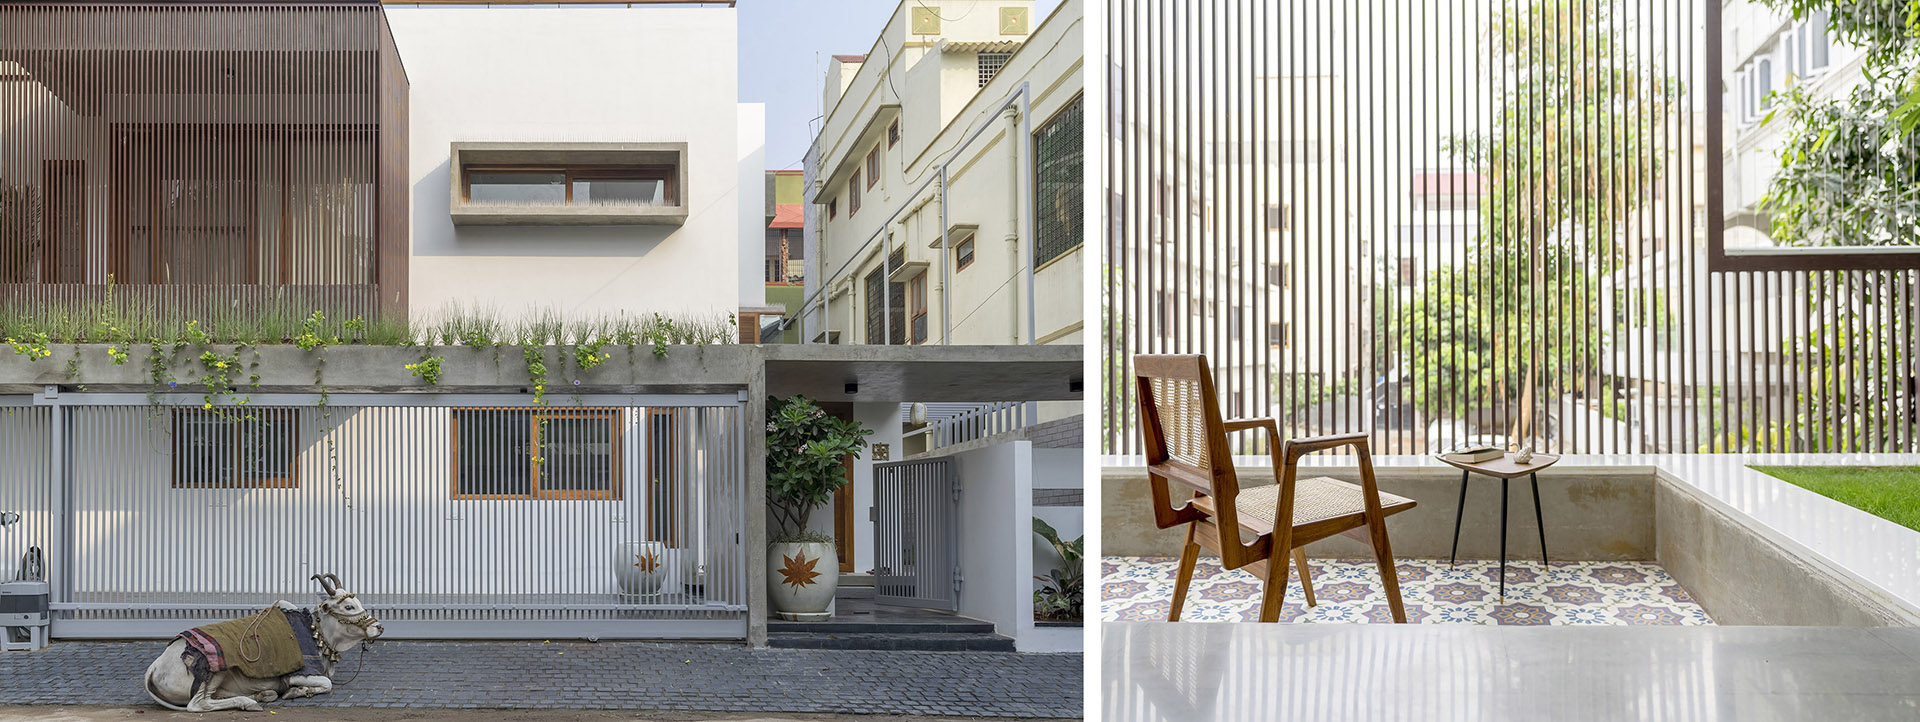 Courtyard House, from the traditional Indian court house in Madras, a place that embraces both nature and family